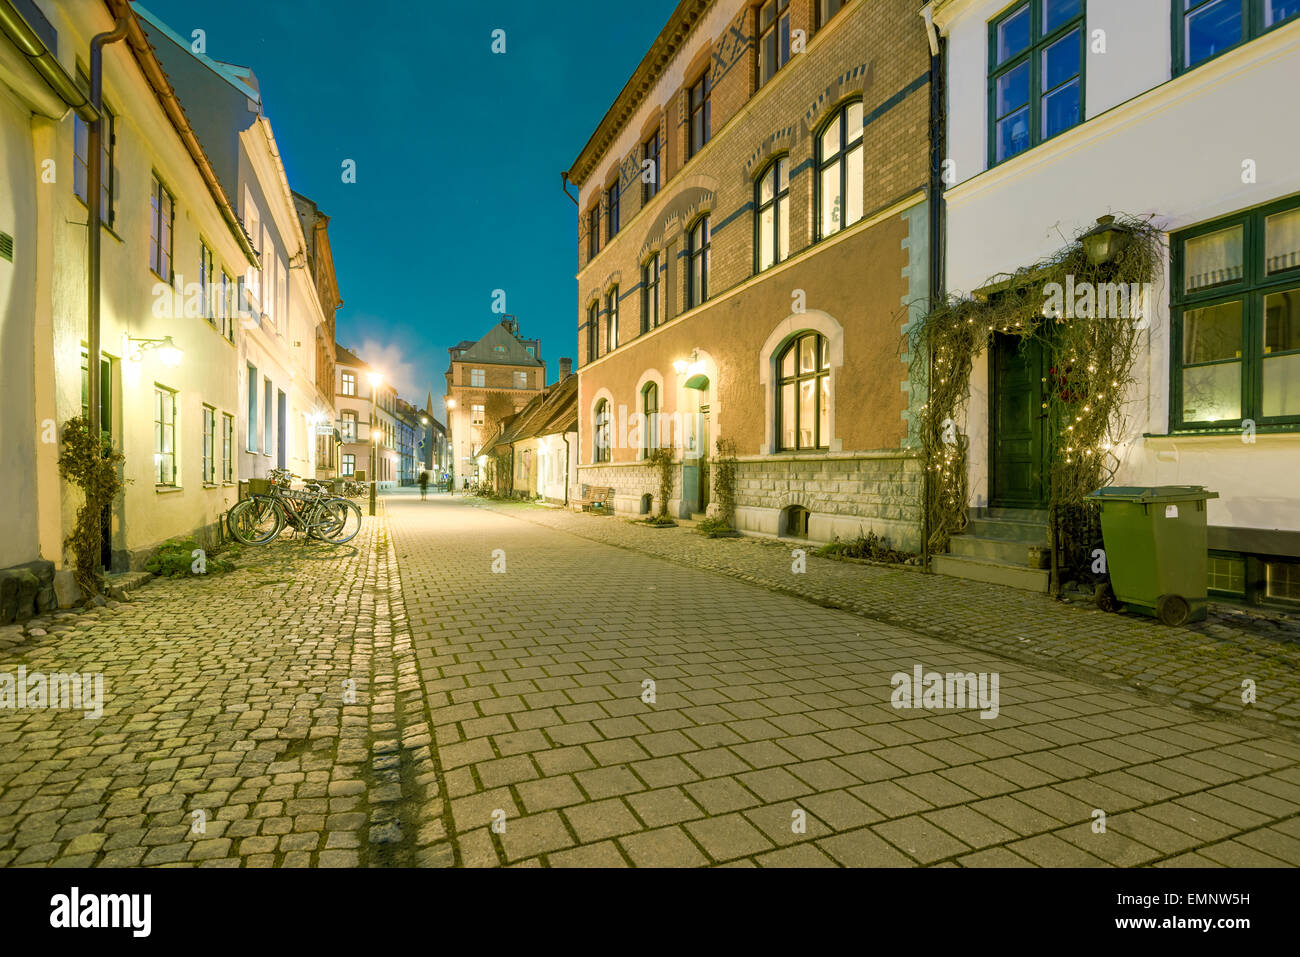 Inga Marie Nilssons gata - street in central old part of Swedish Malmo Stock Photo